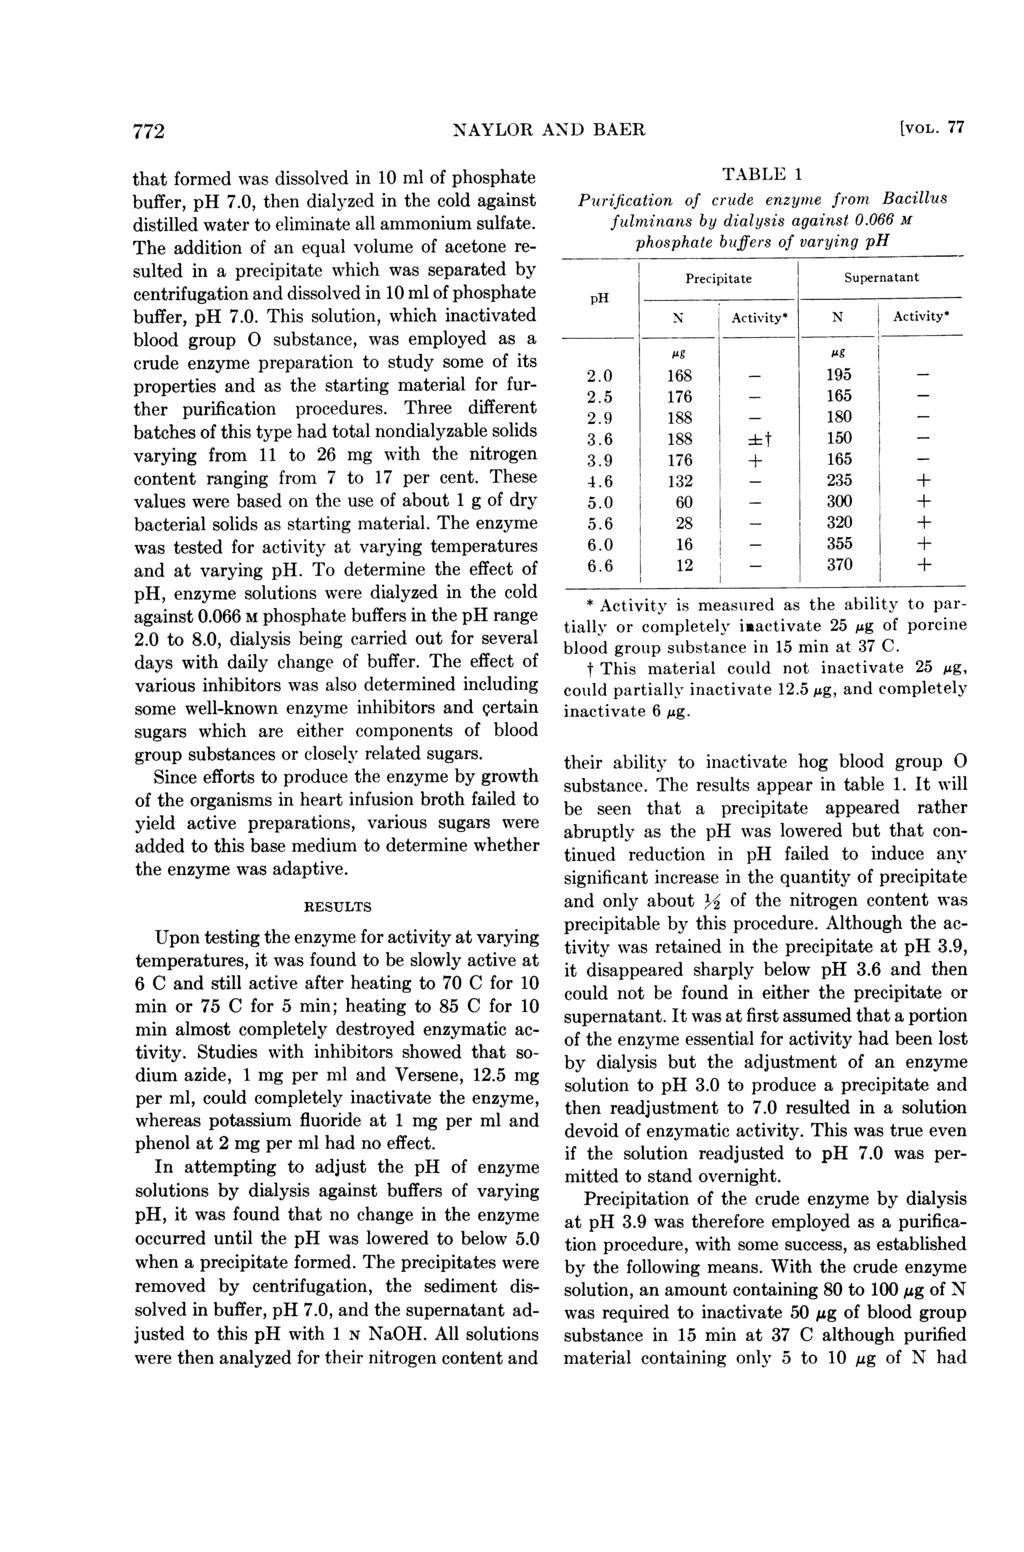 772 NAYLOR AND BAER [VOL. 77 that formed was dissolved in 10 ml of phosphate buffer, ph 7.0, then dialyzed in the cold against distilled water to eliminate all ammonium sulfate.